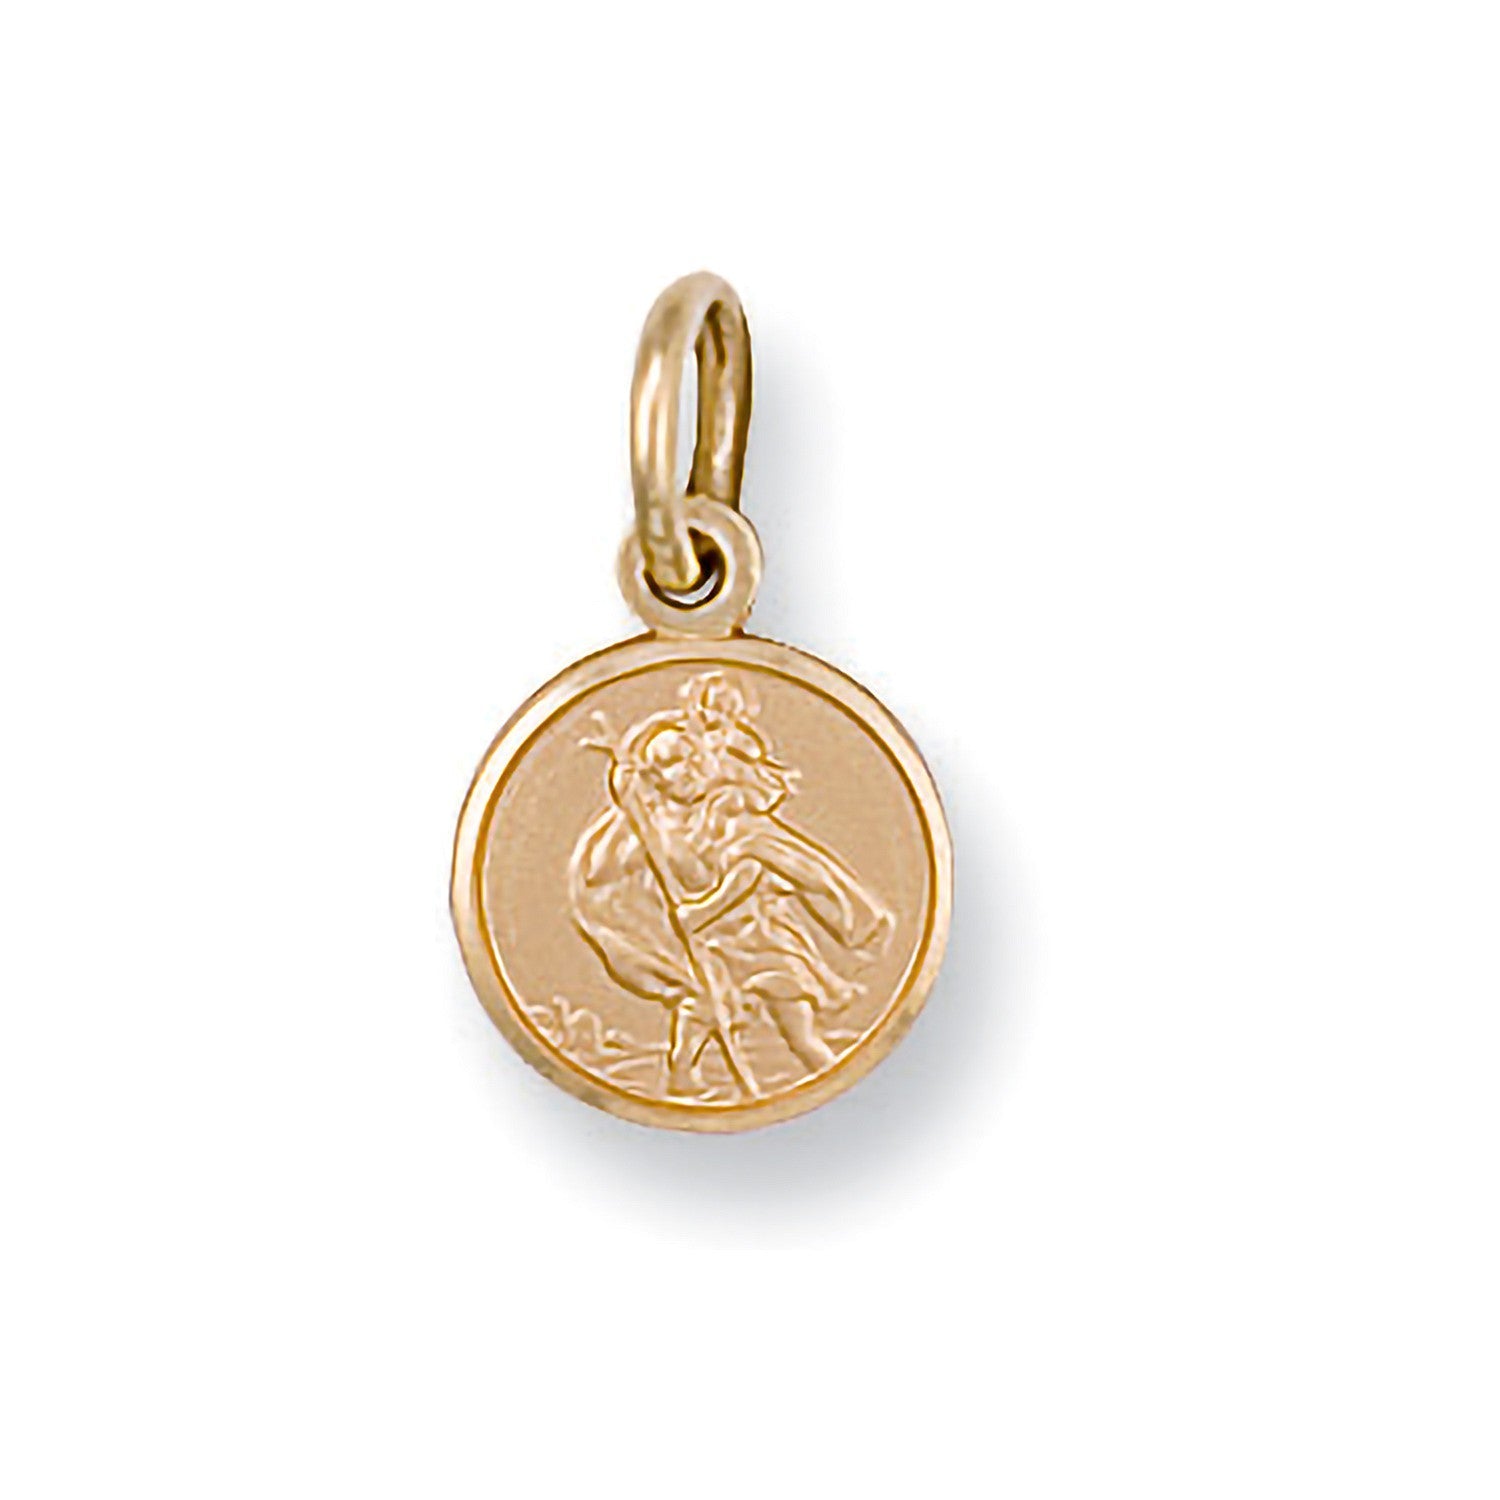 9ct Yellow Gold St Christopher Classic Pendant - FJewellery